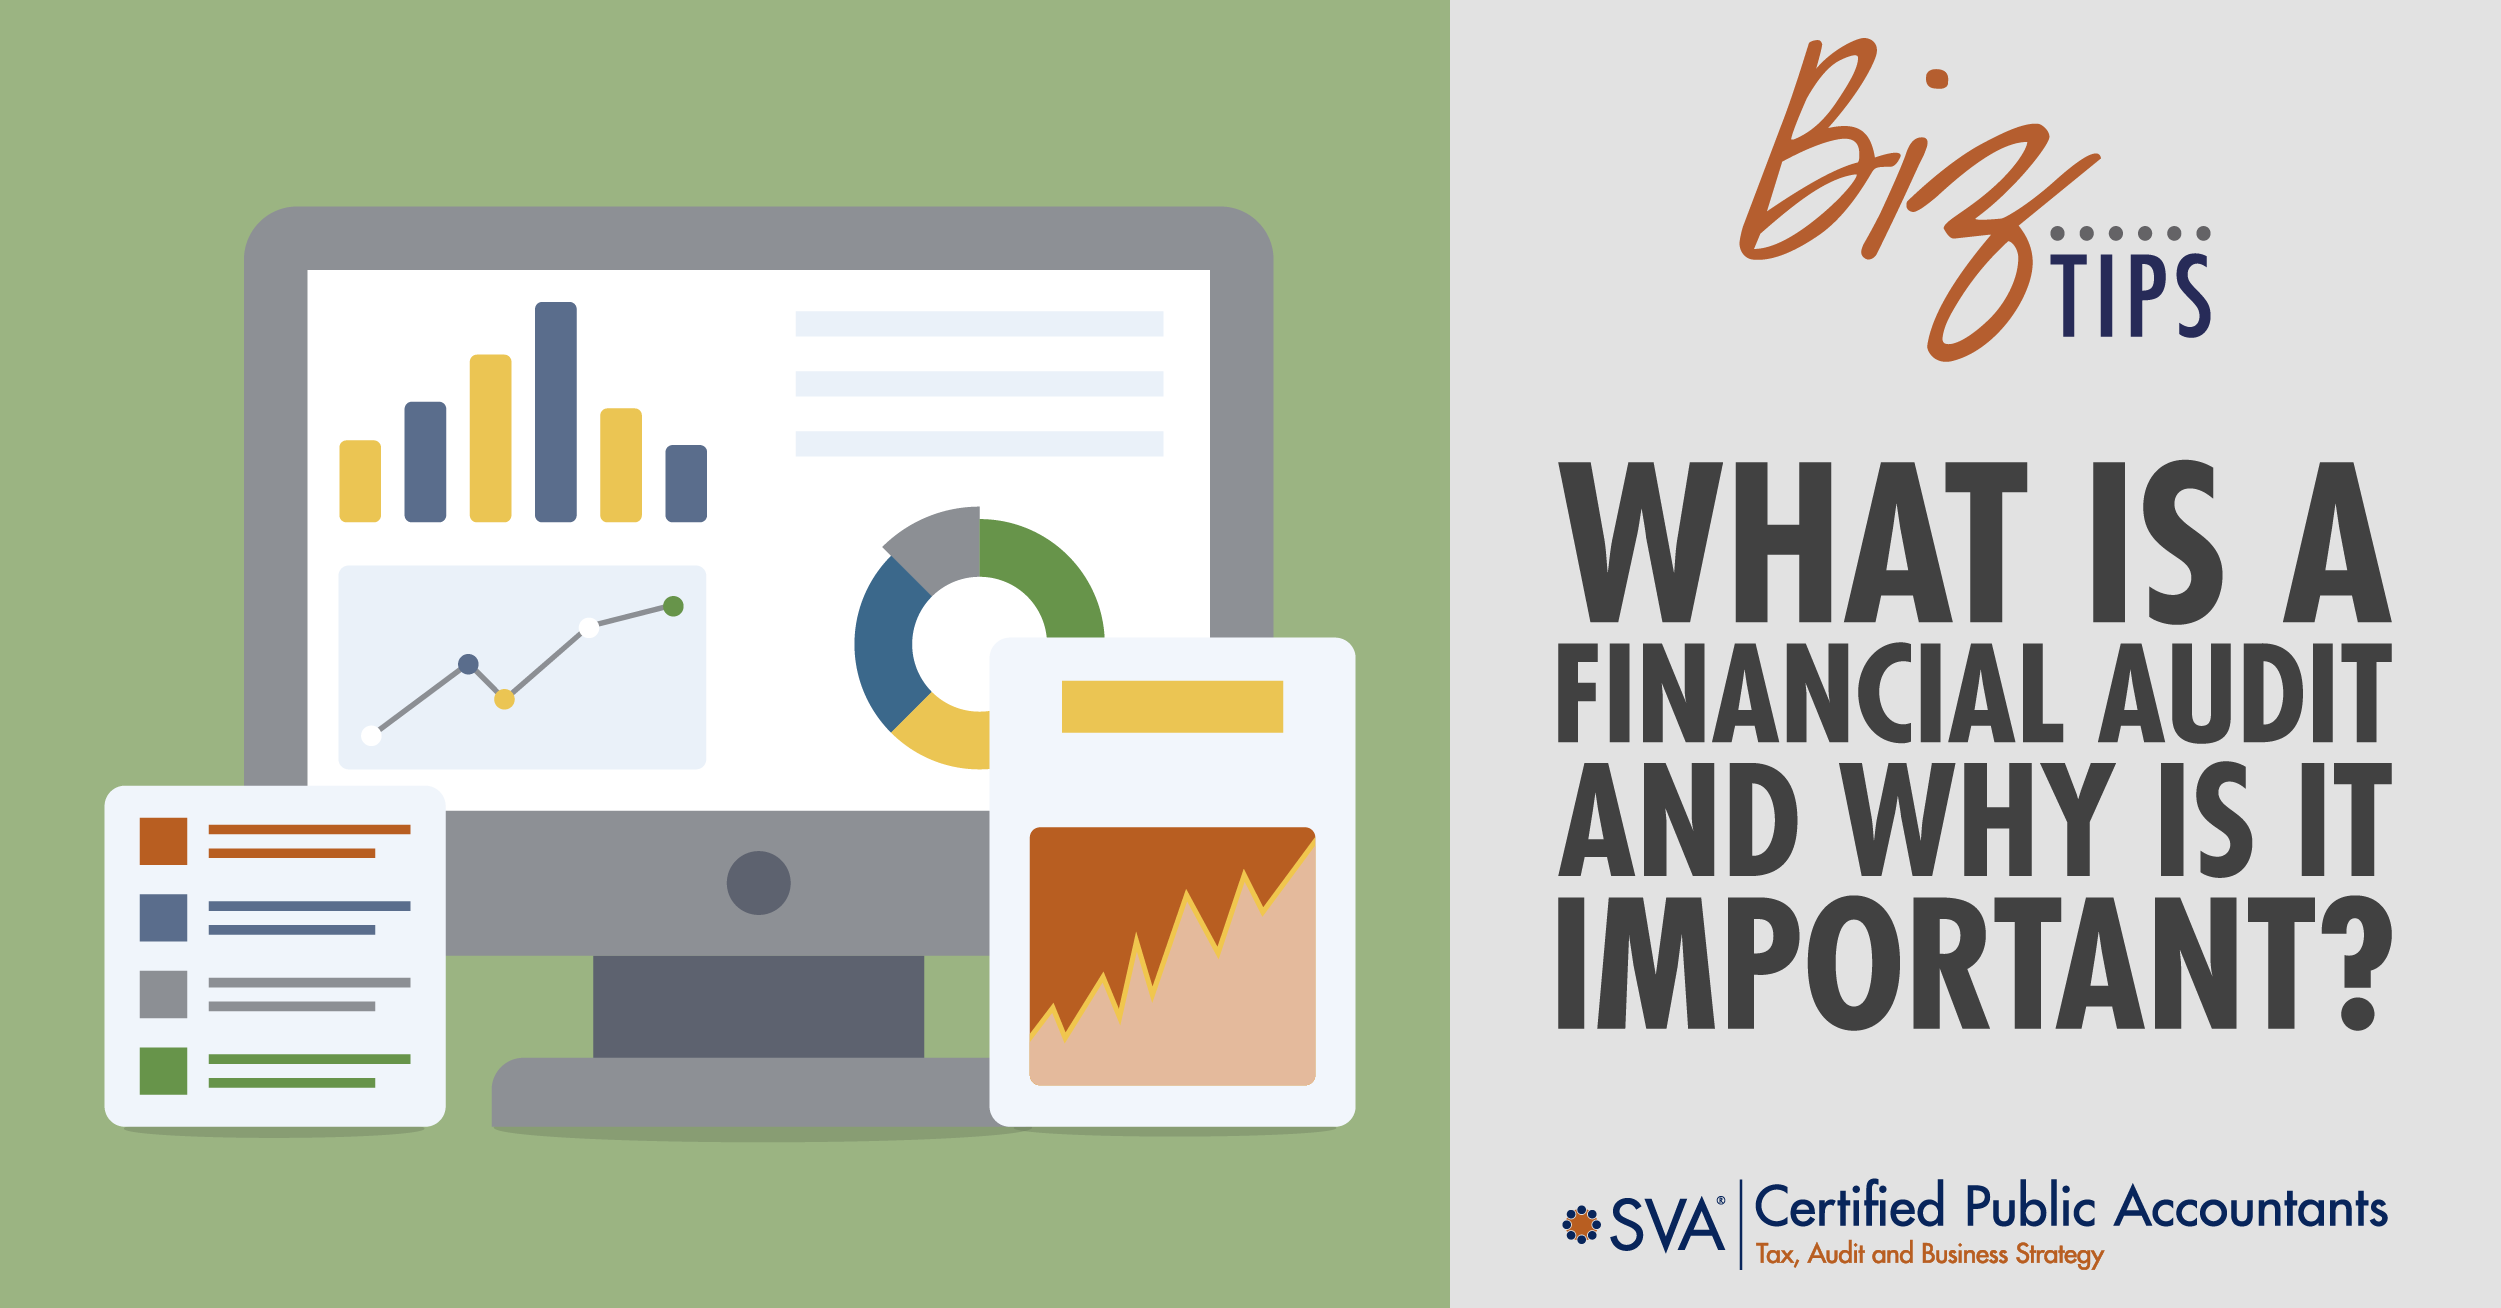 What is a Financial Audit and Why is it Important?